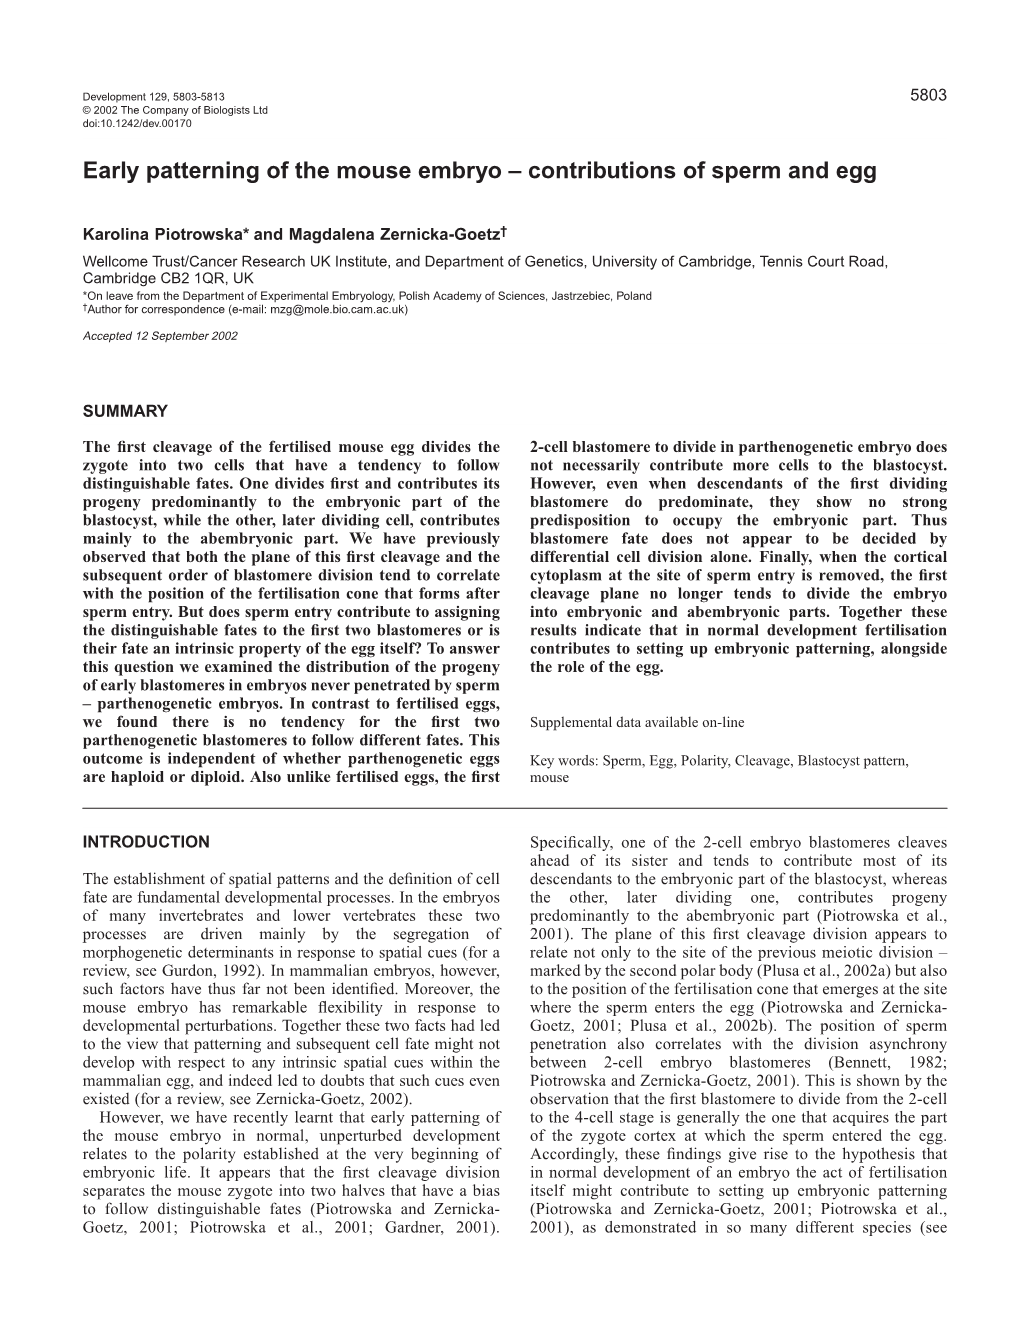 Sperm Penetration and Early Patterning in the Mouse 5805